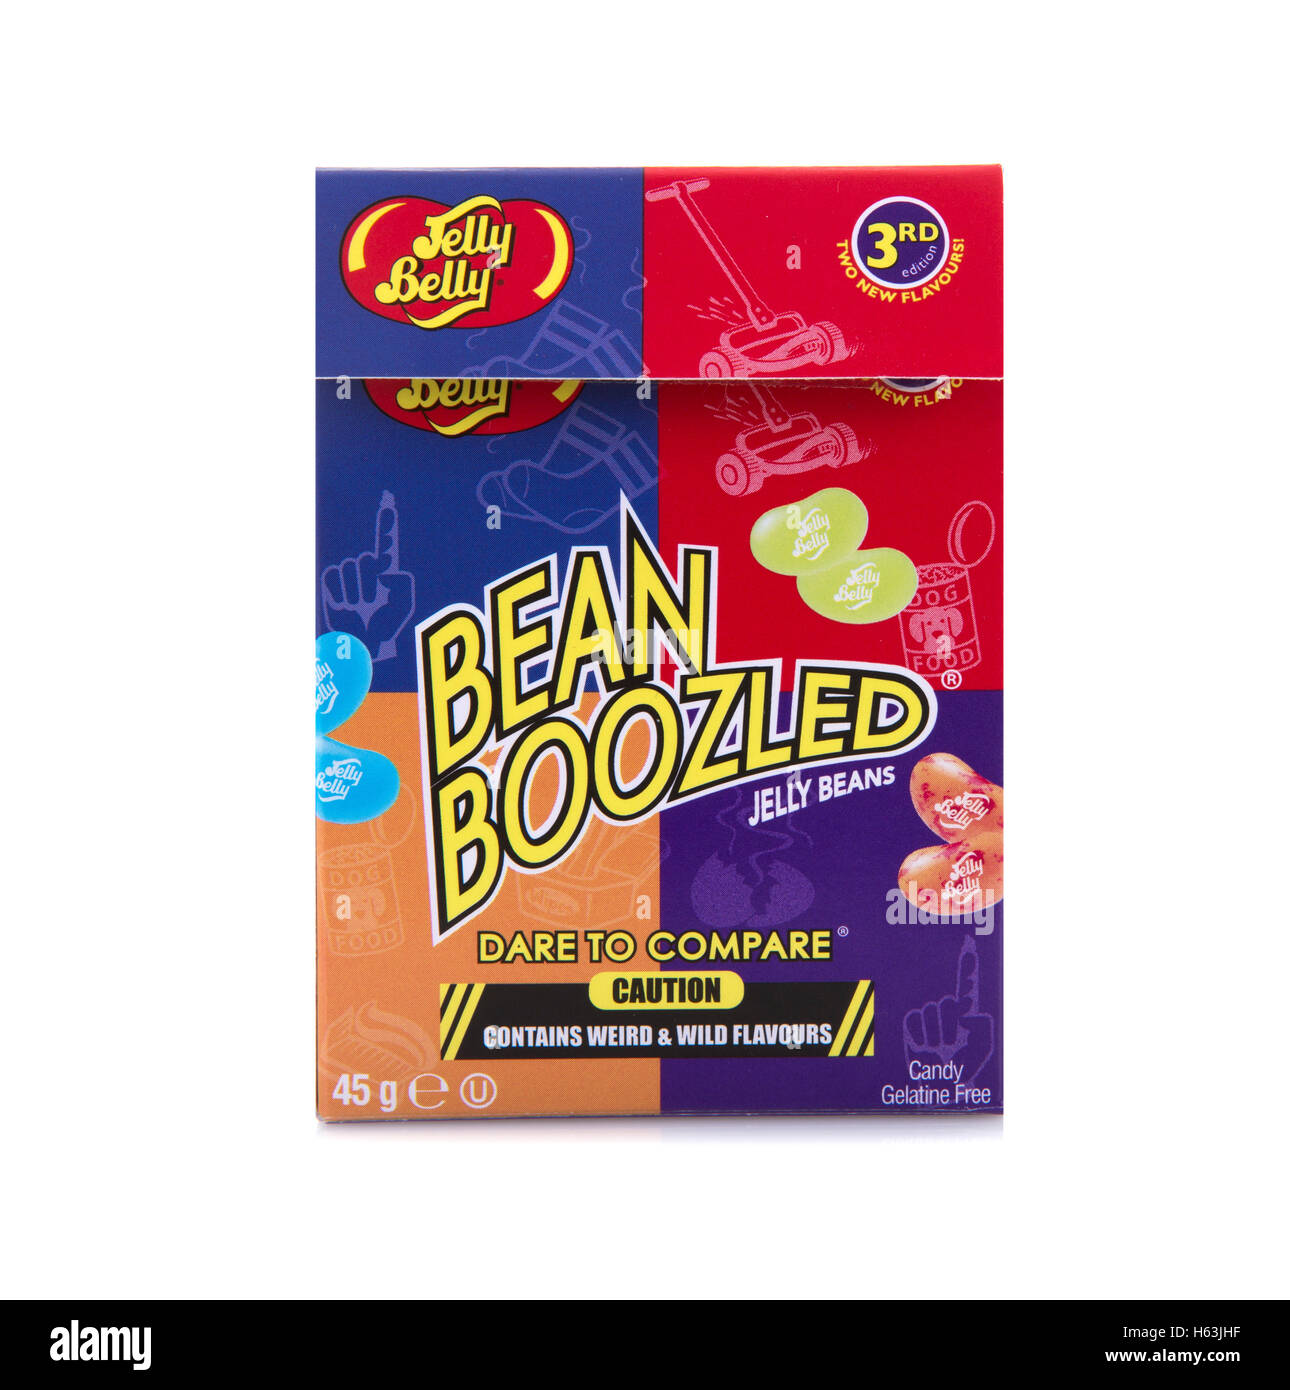 Jelly Belly Bean Boozled Dare to Compare Jelly Beans Stock Photo